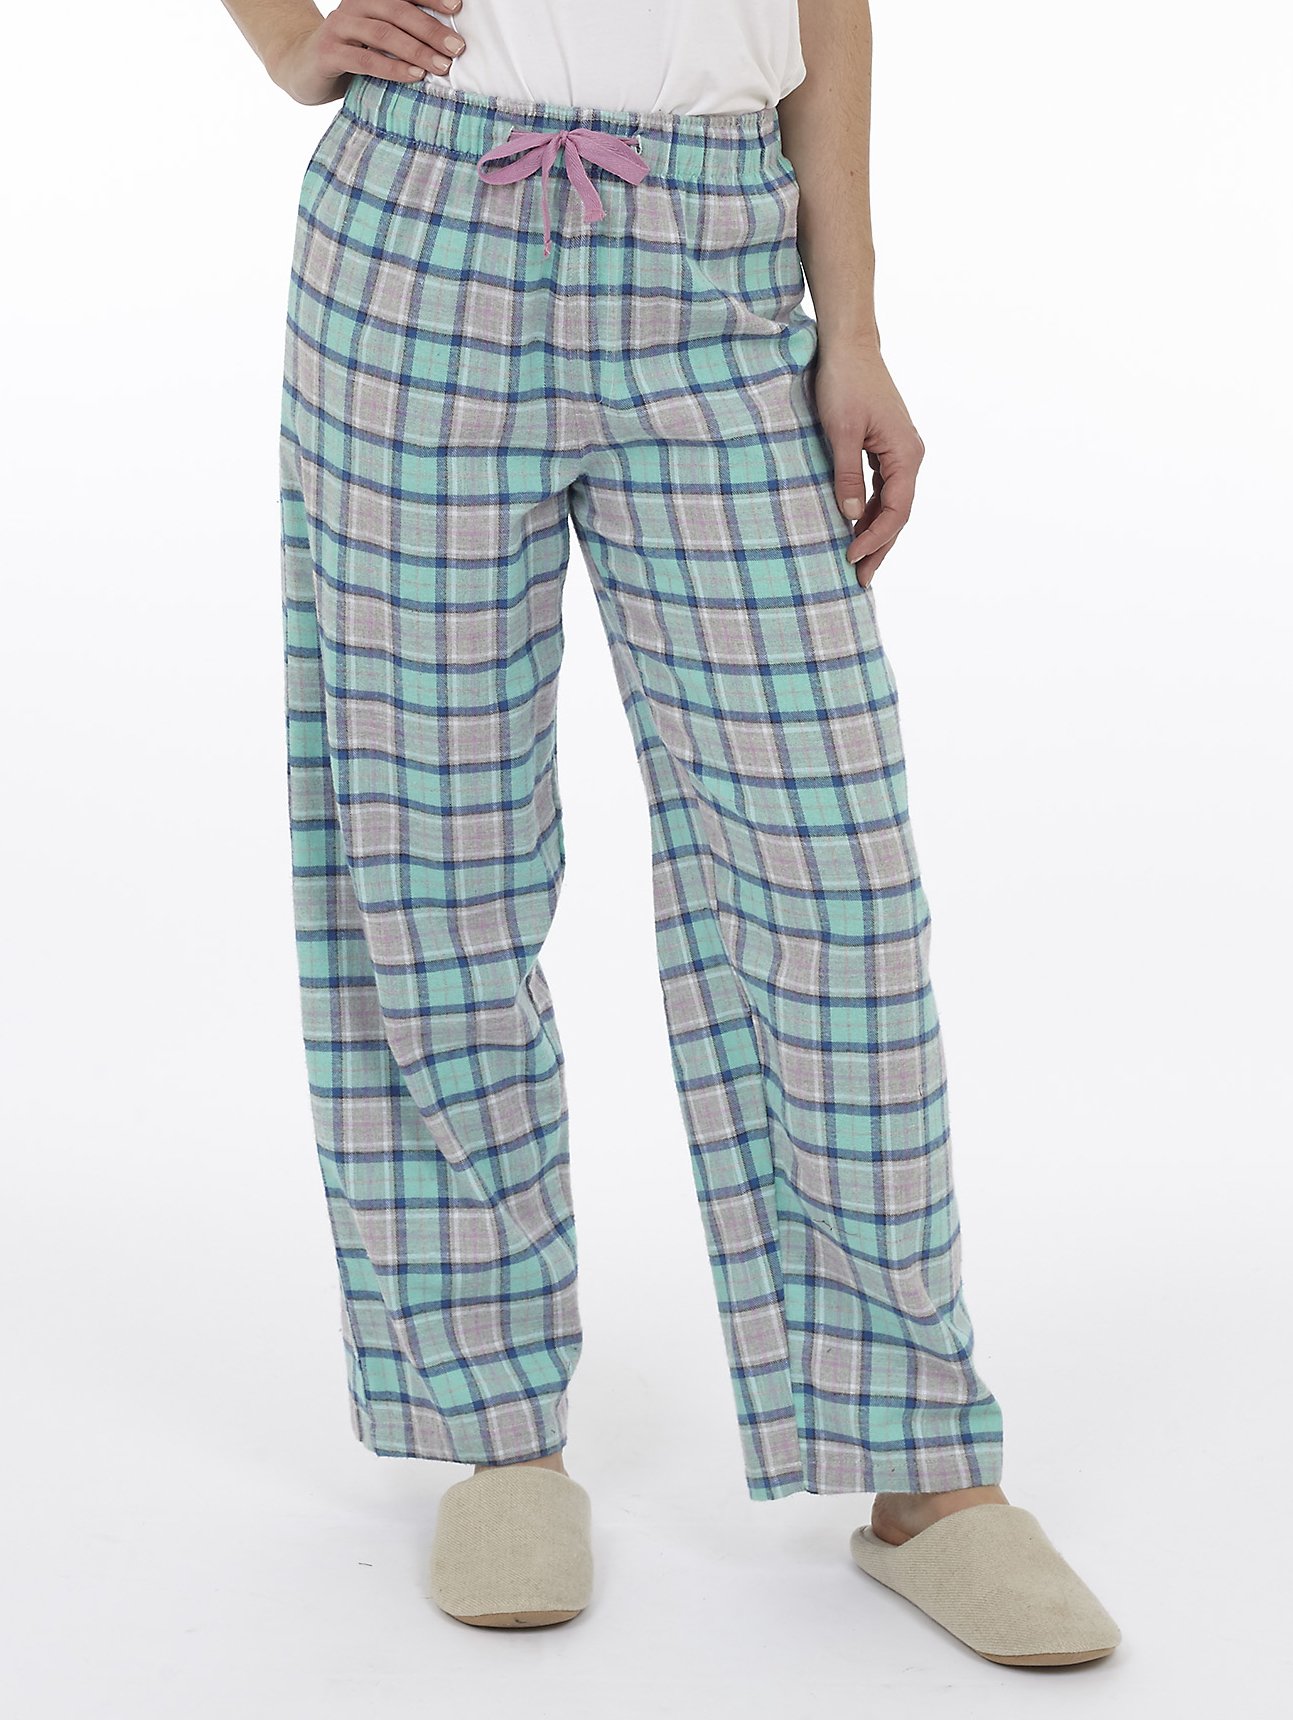 Ladies PJ Pant - DKR & Company Apparel / Clothes Out Trading